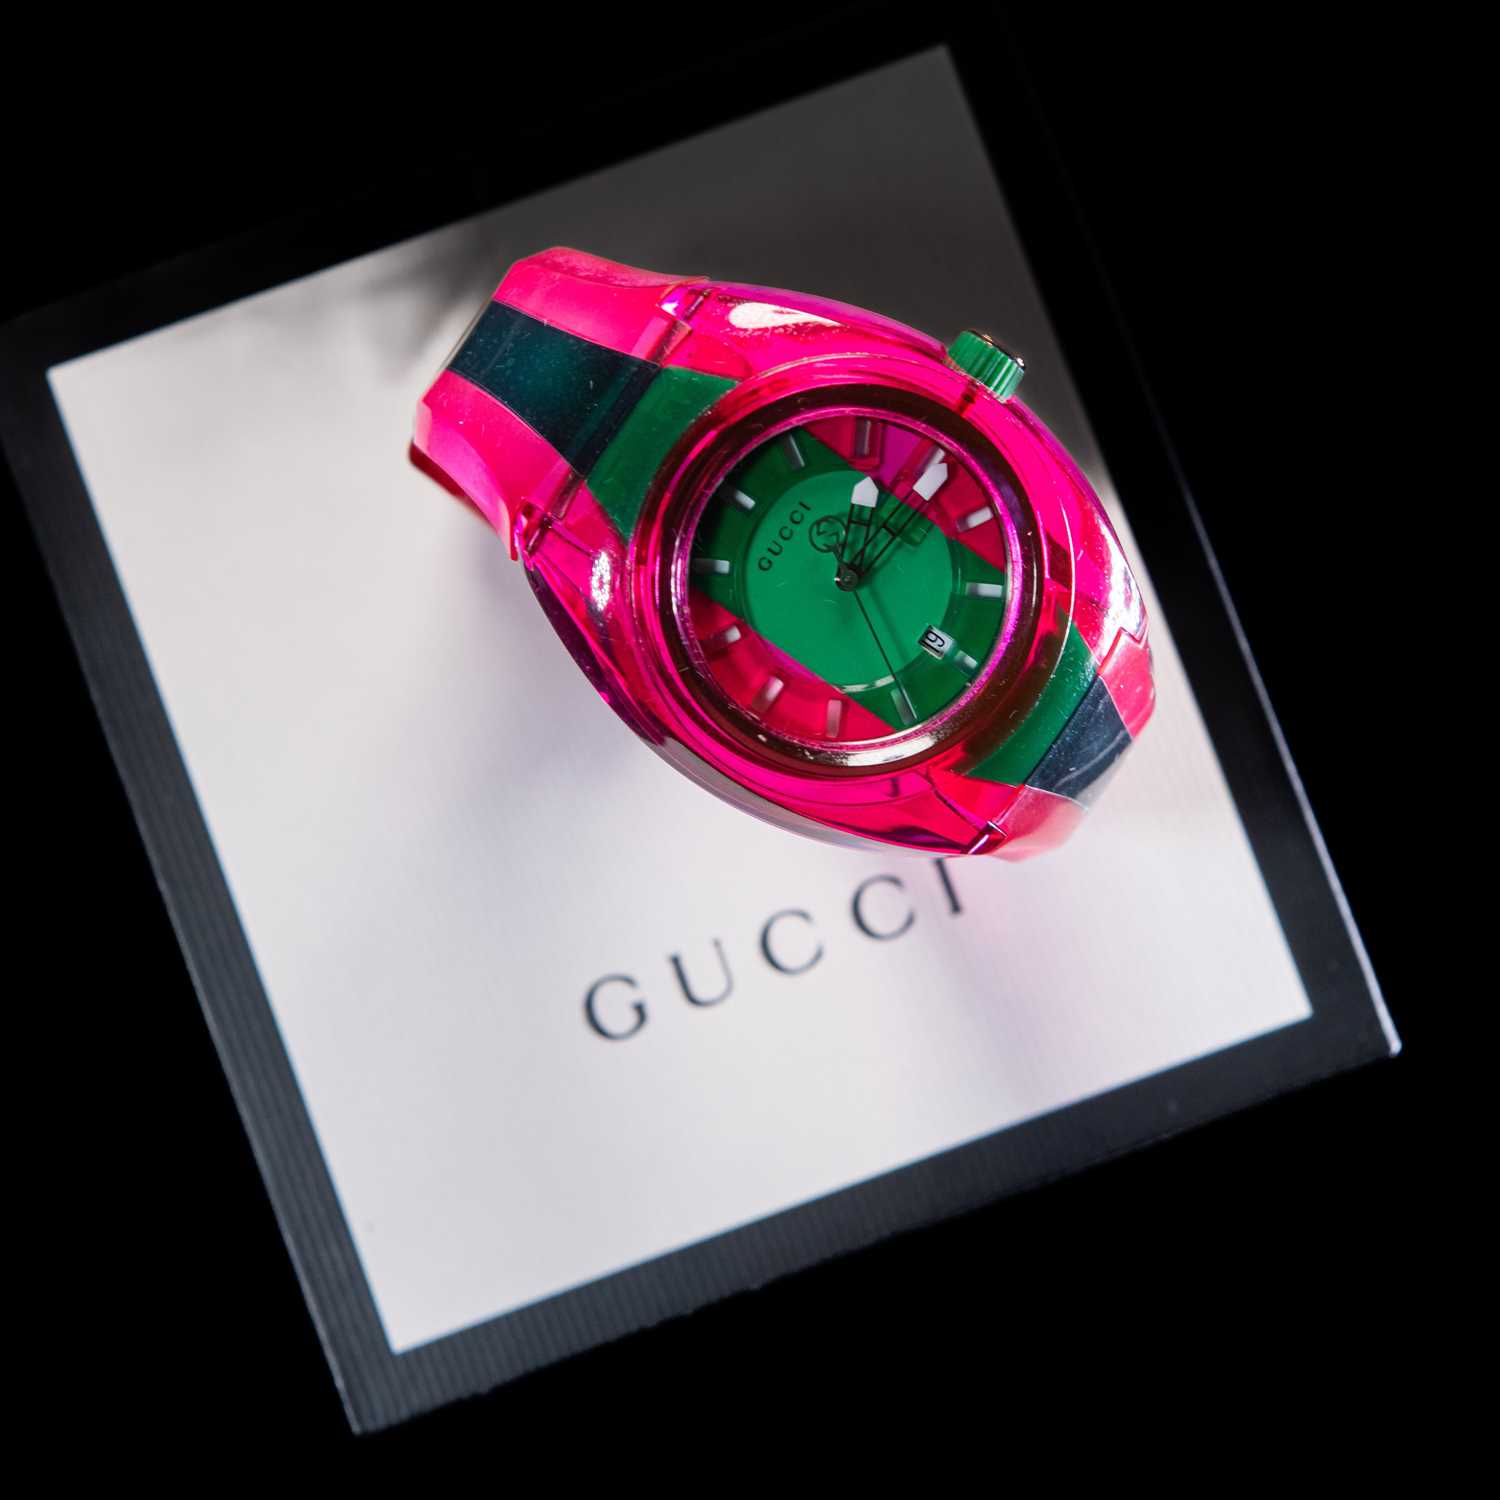 A GUCCI SYNC STRAP WATCH - Image 2 of 2